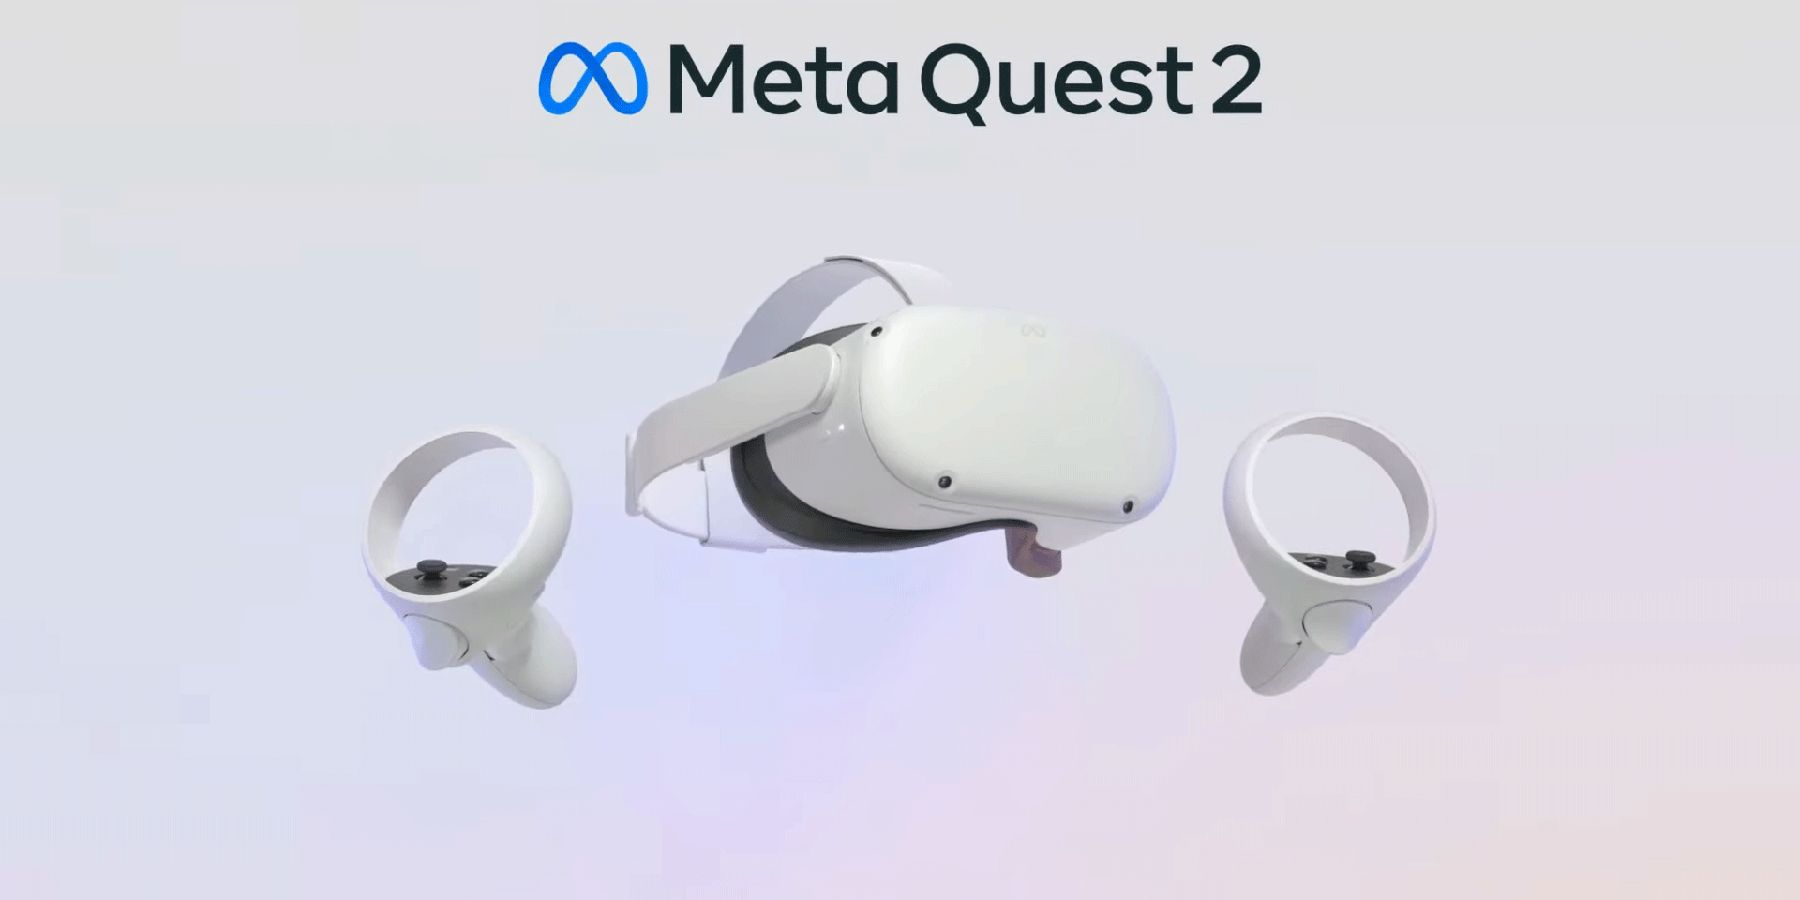 Xbox Game Pass Is Coming To Meta Quest VR Headset - GameSpot